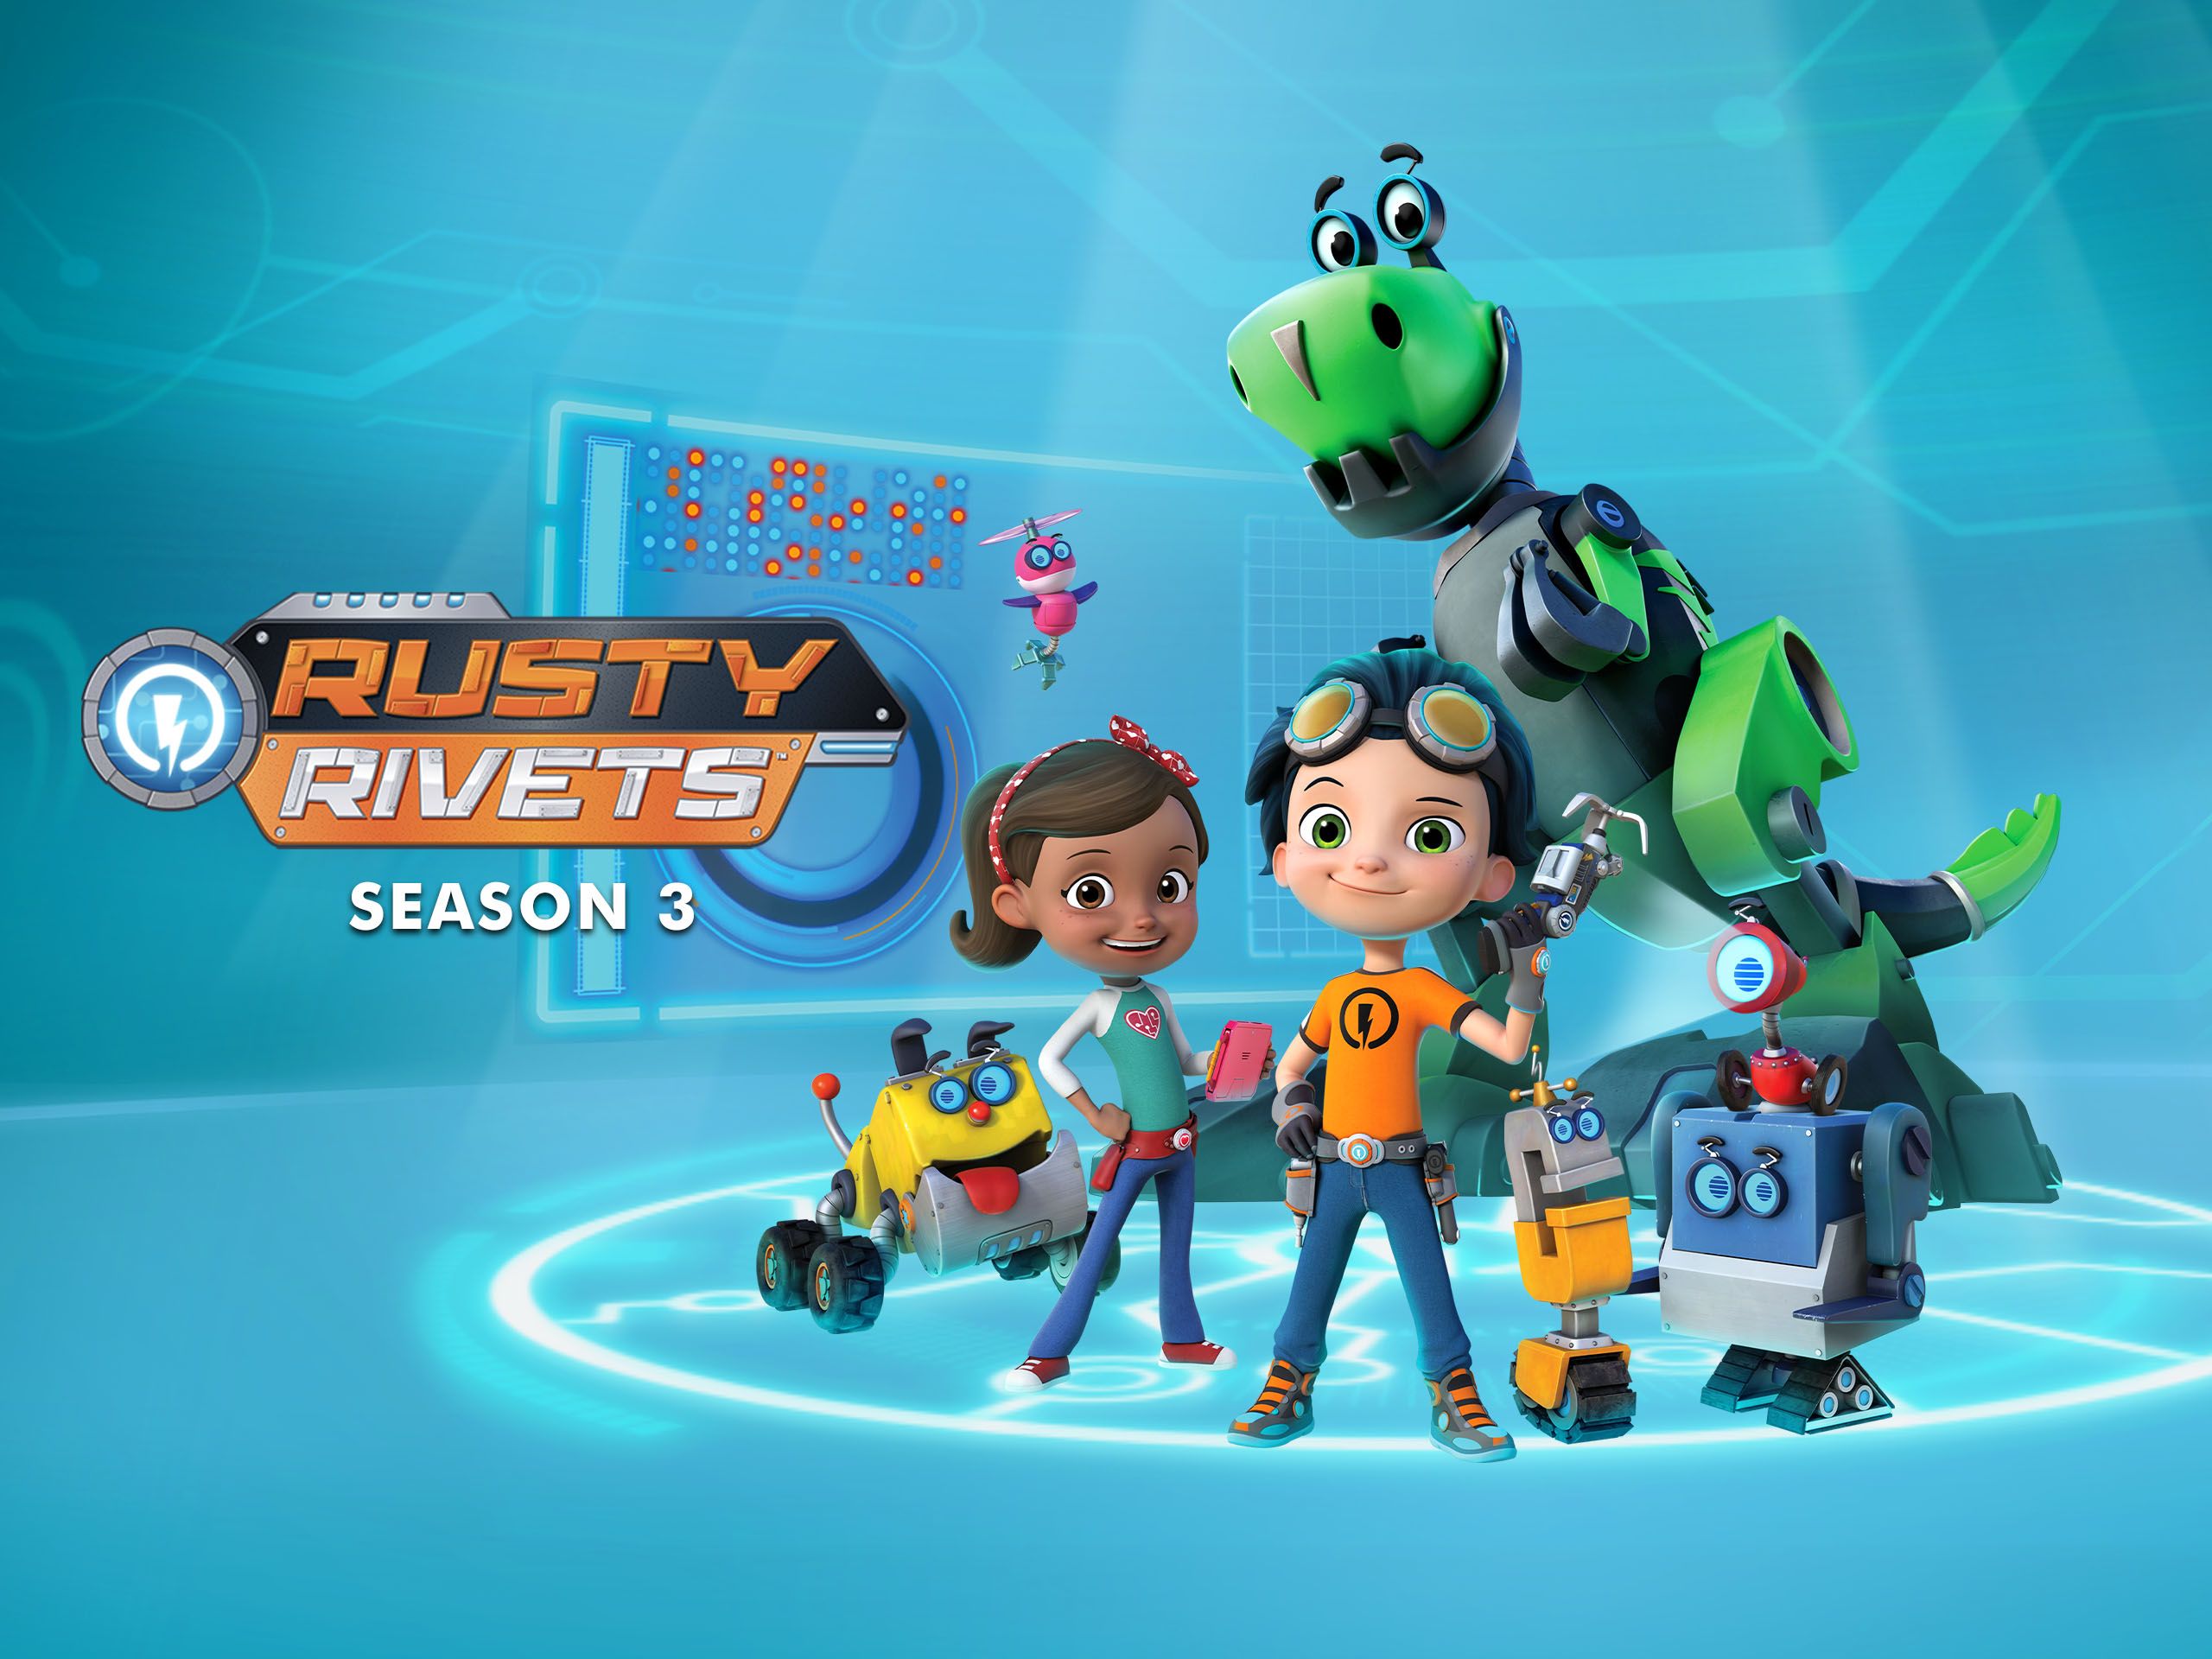 EN Sign In Account Menu Sign In Website Language This title may not be available to watch from your location. Go to amazon.com to see the video catalog in United States. Rusty Rivets Season 3 Season 1 Season 2 Season 3 2020ALL Rusty and his